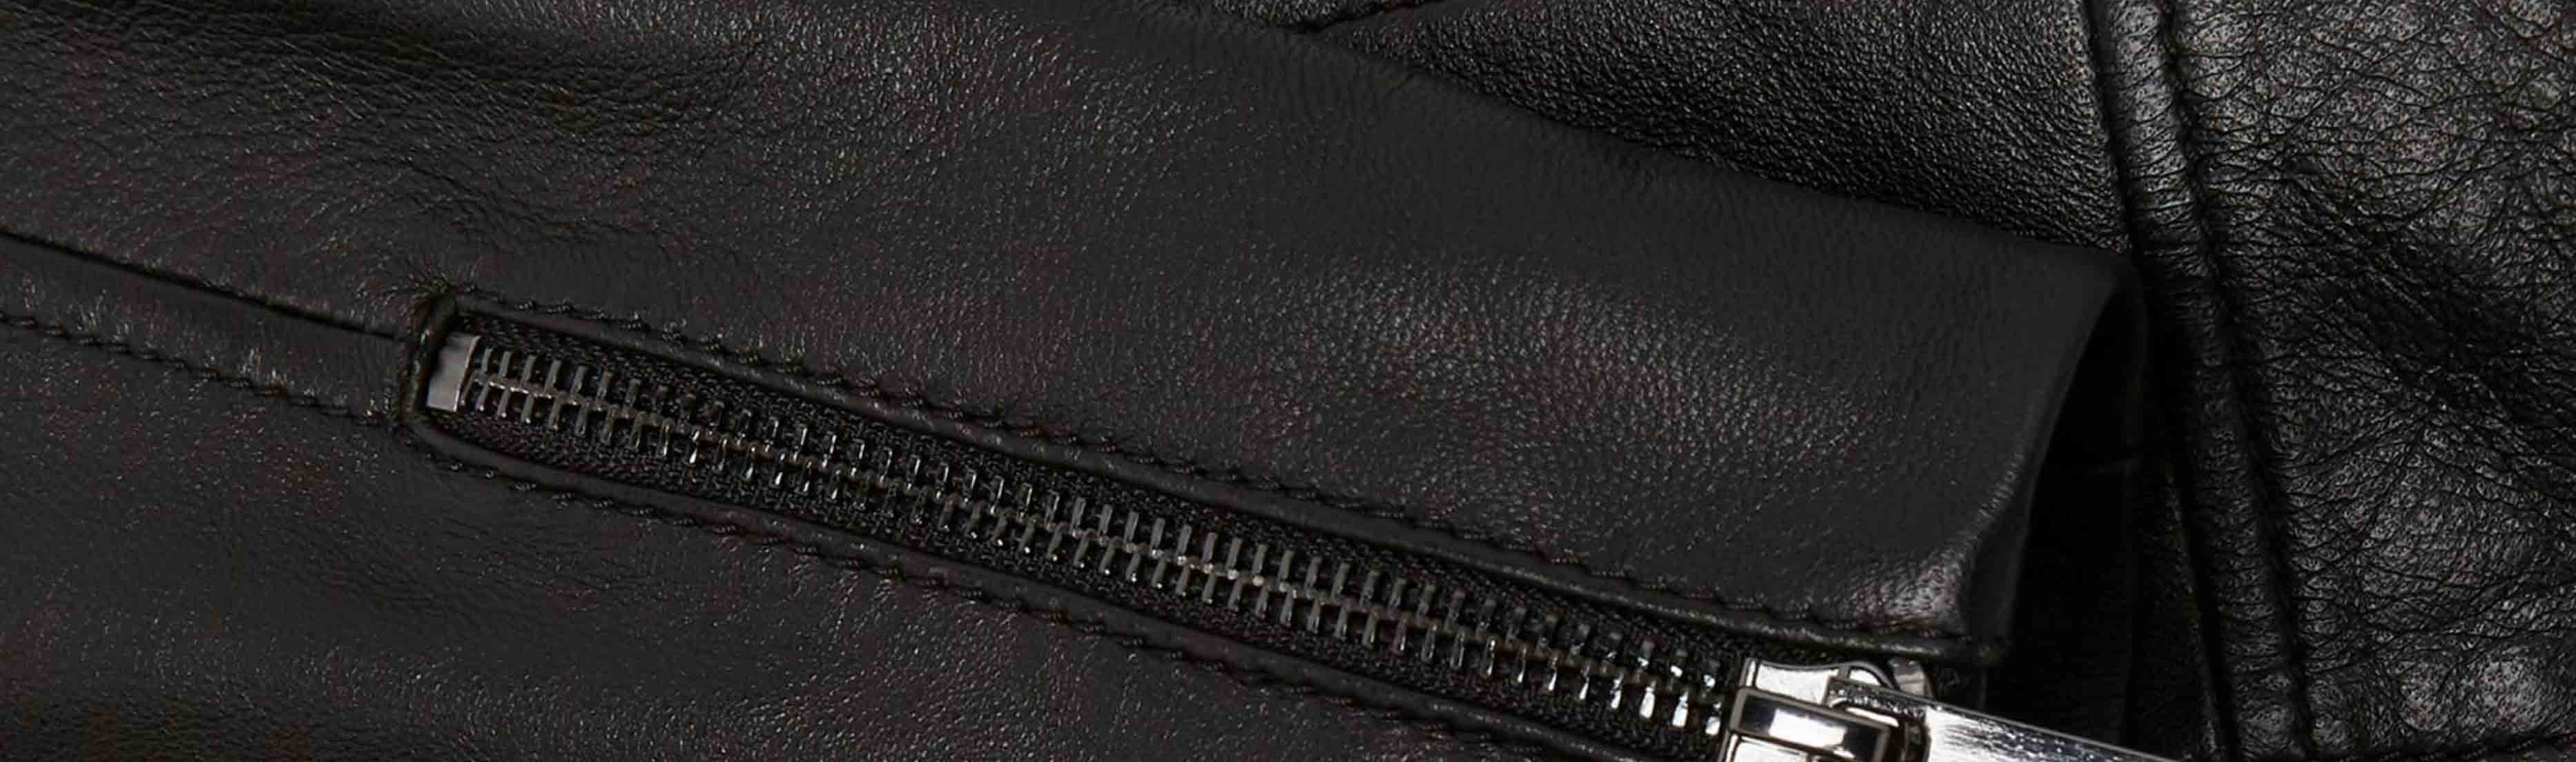 A close-up of the cuff of a Hobbs leather biker jacket.